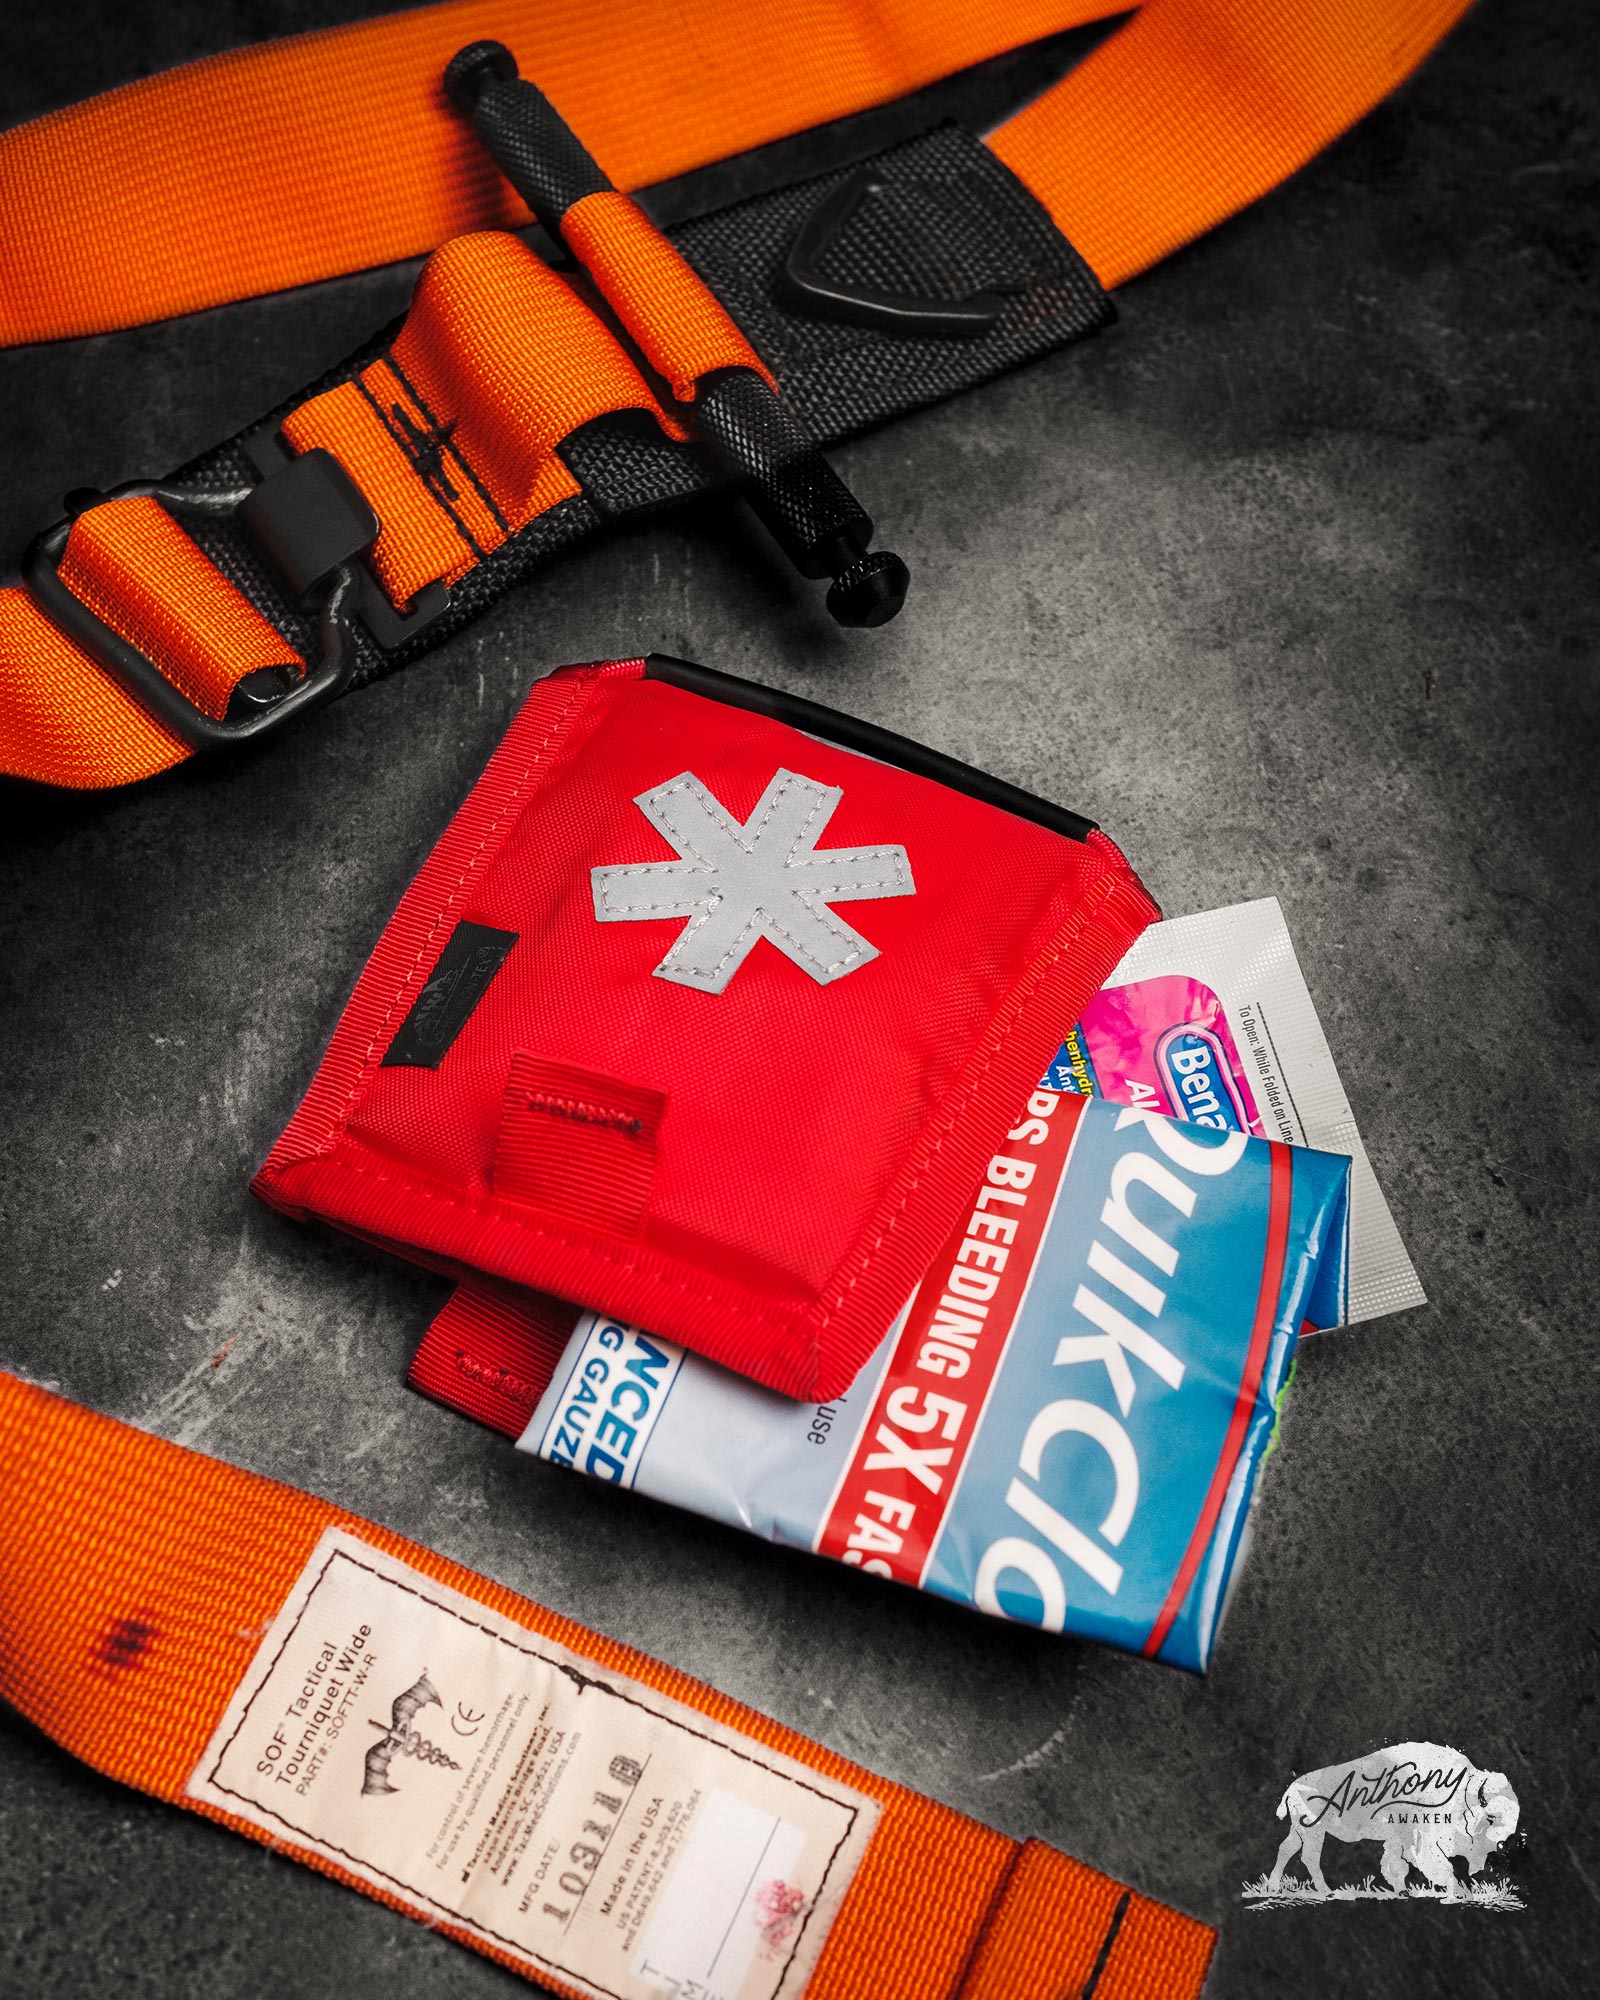 Best EDC First Aid Kit